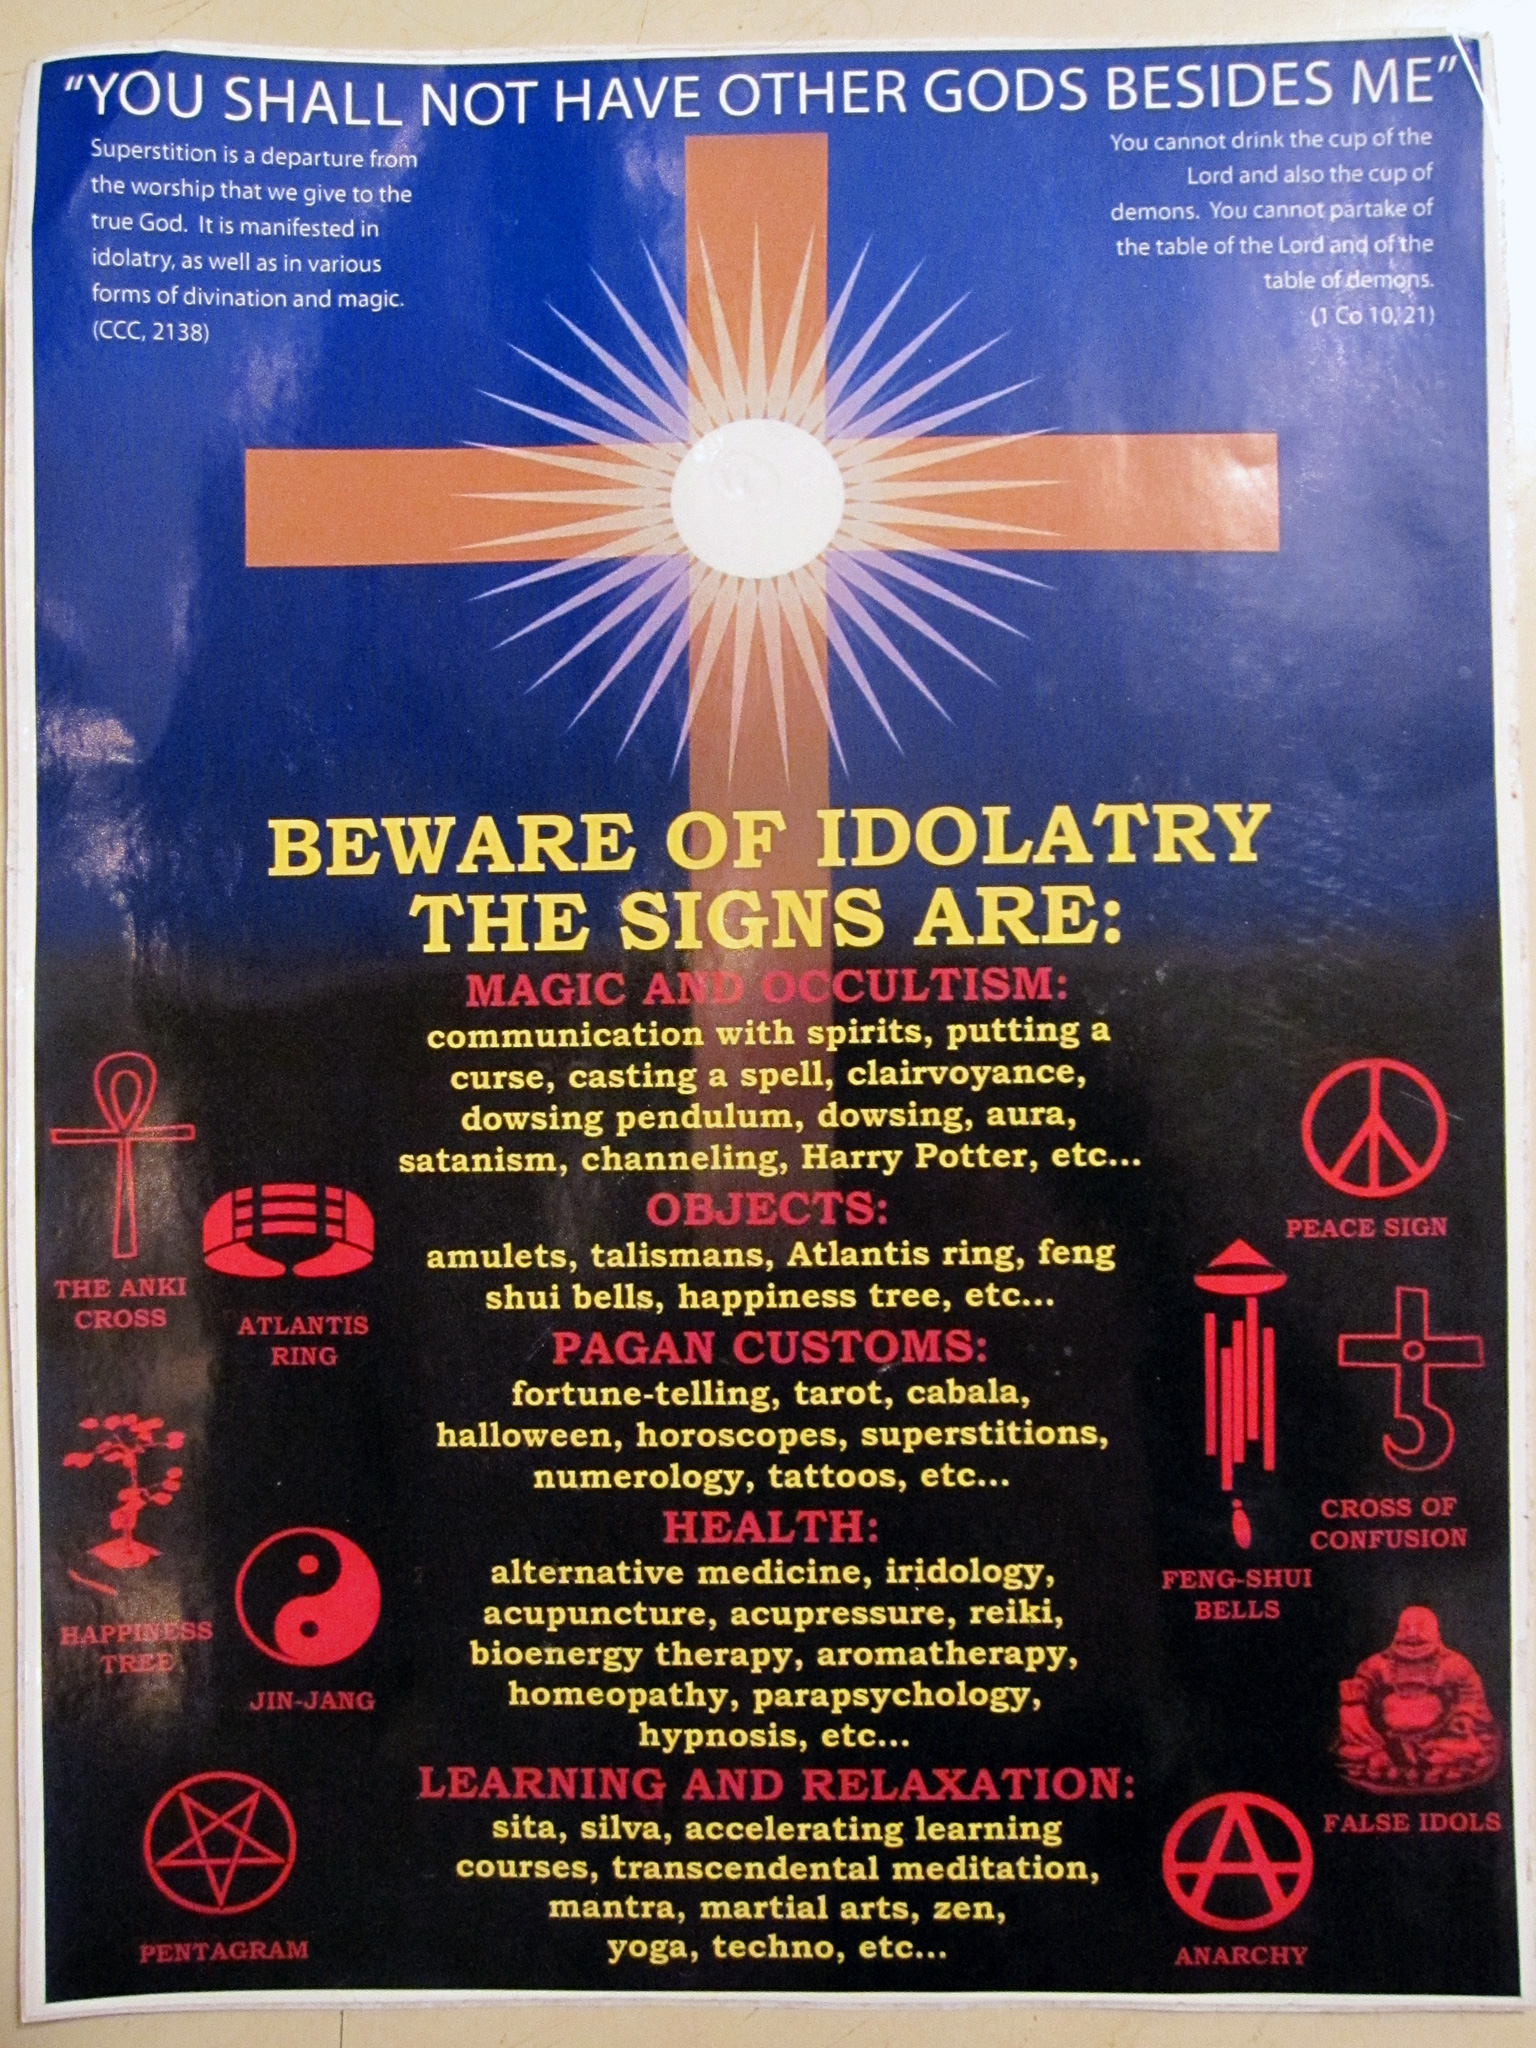 this poster has information to the various kinds of religious